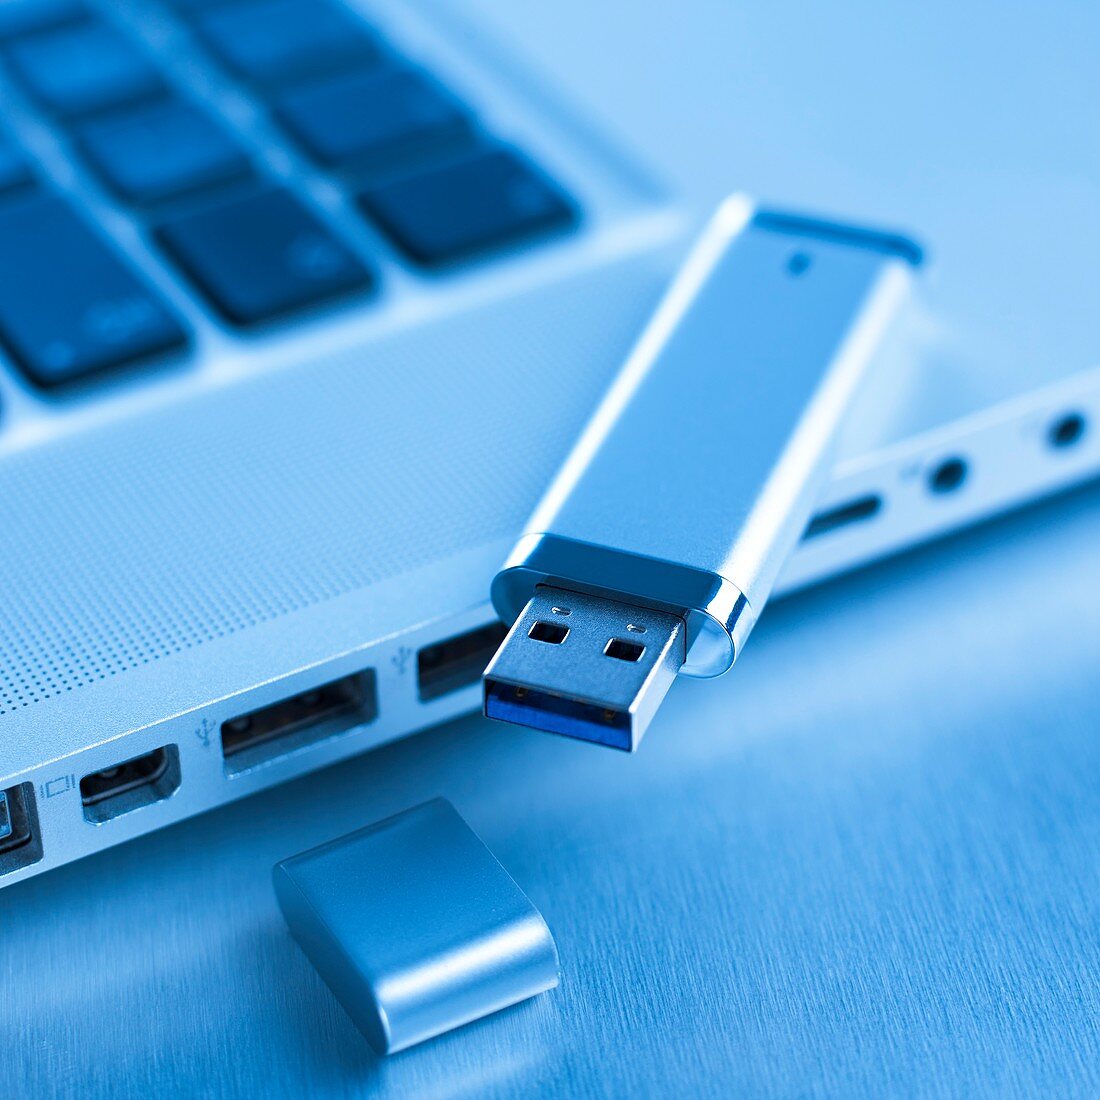 USB memory stick and laptop